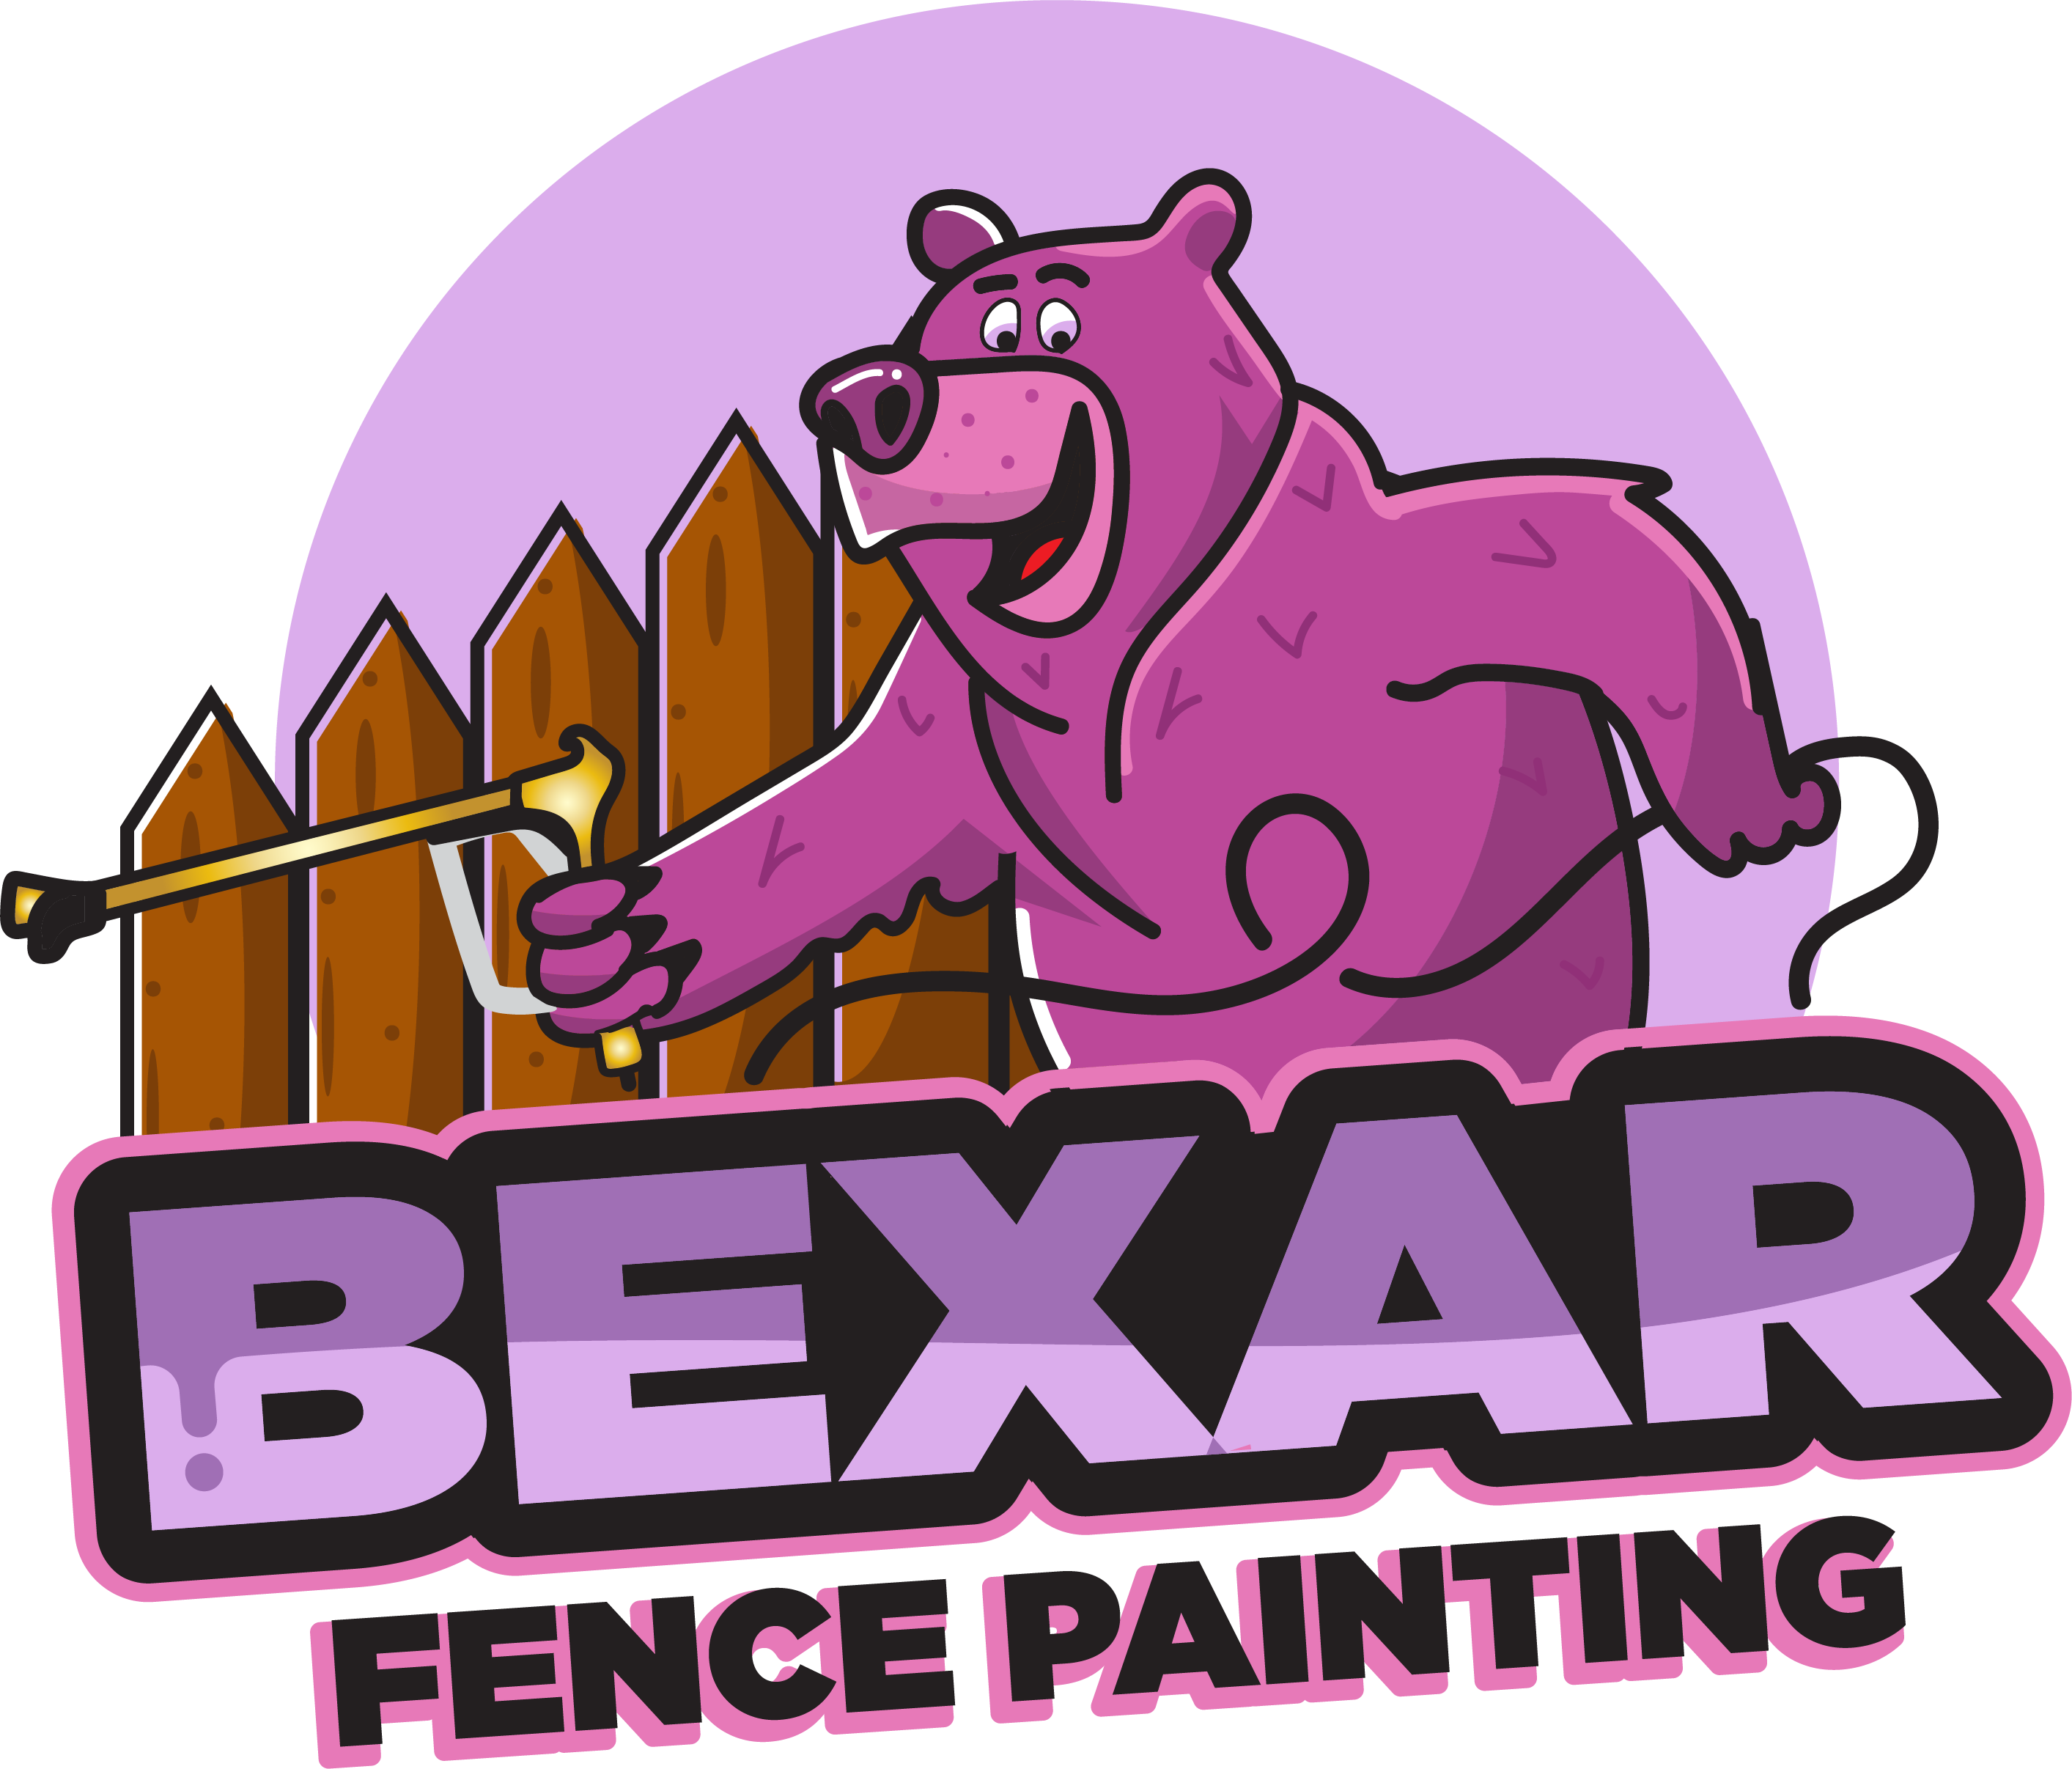 Fence Painting I Bexar Fence Painting